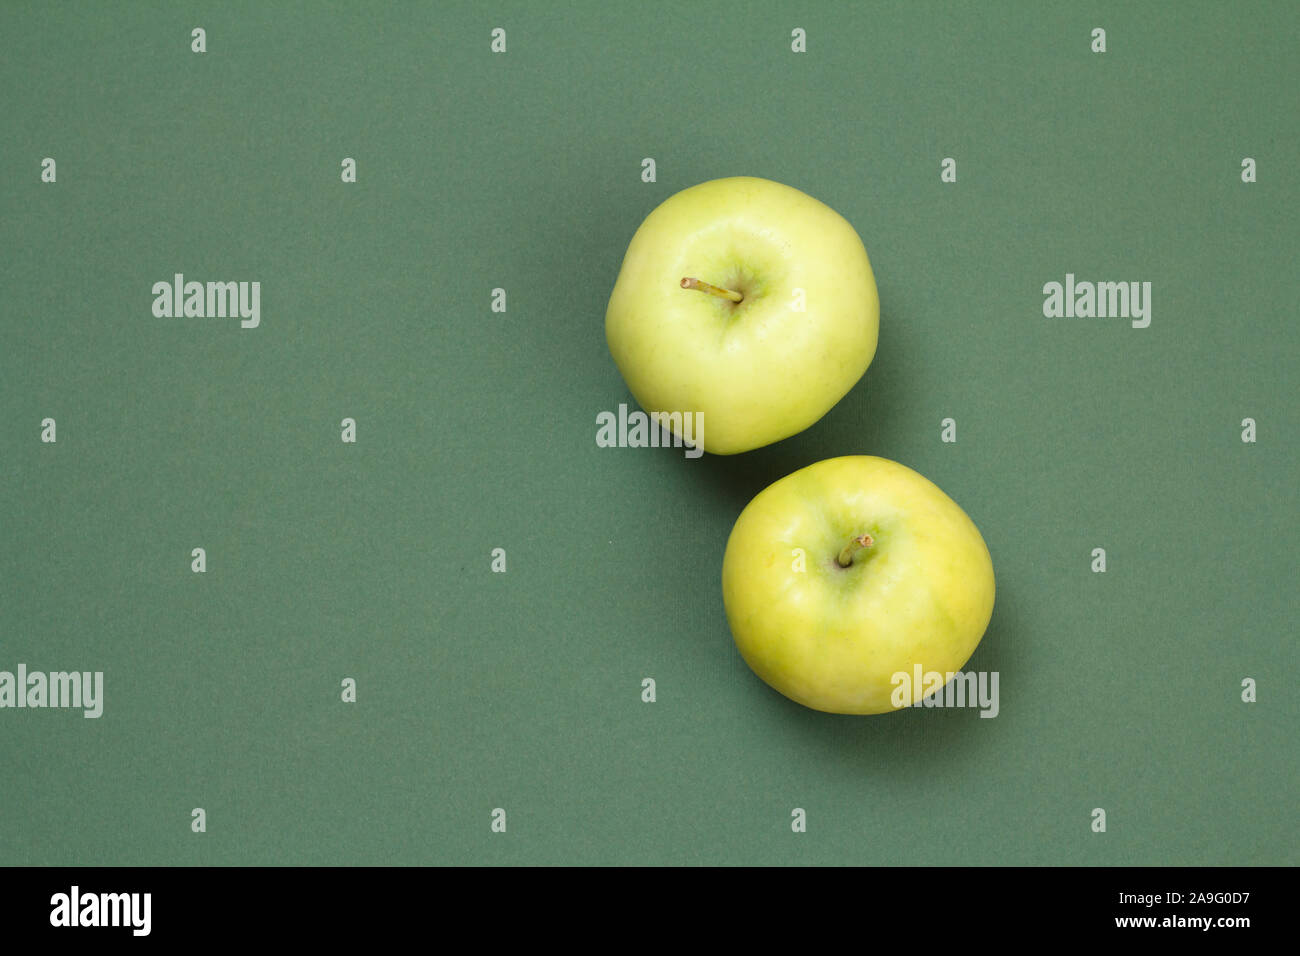 Two apples on green background with copy space. Top view. Stock Photo